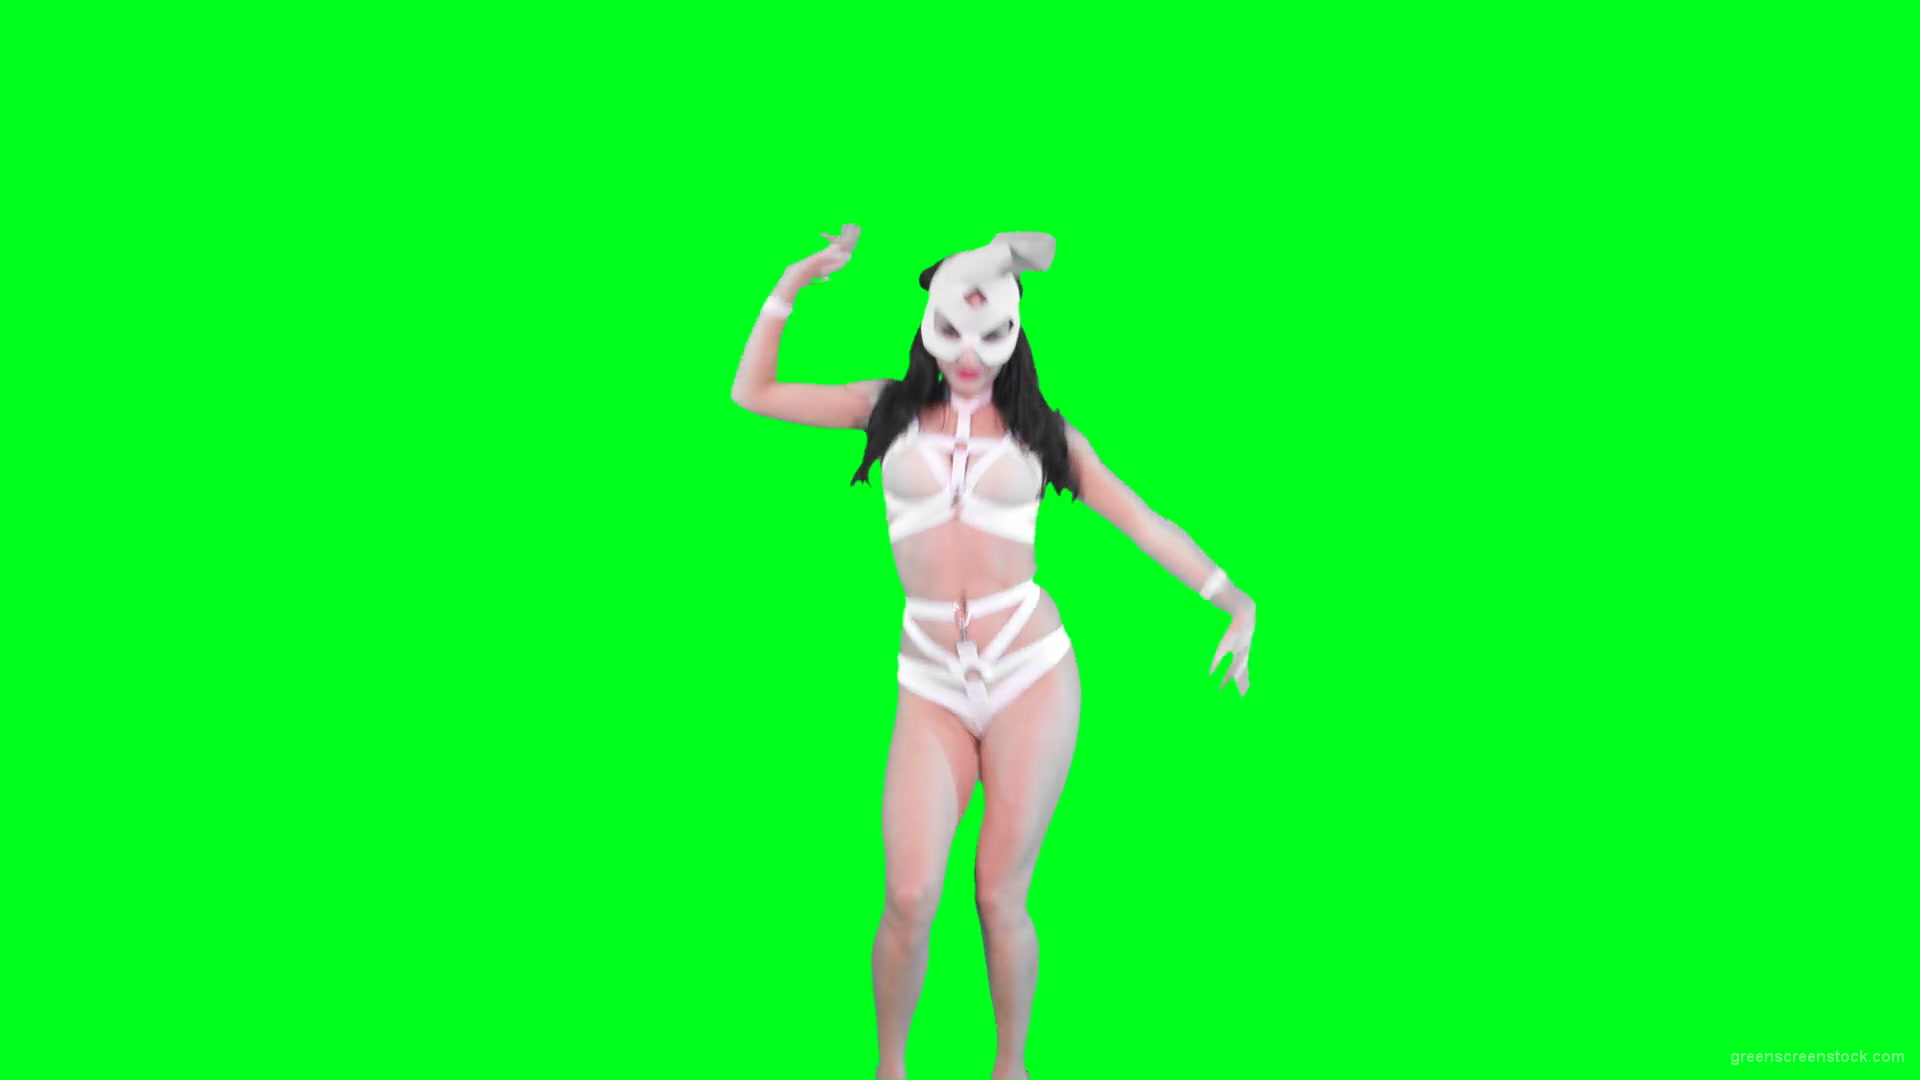 Go-go-Dancer-in-White-Rabbit-EDM-fetish-costume-making-sexy-moves-on-green-screen-4K-video-footage-1920_008 Green Screen Stock